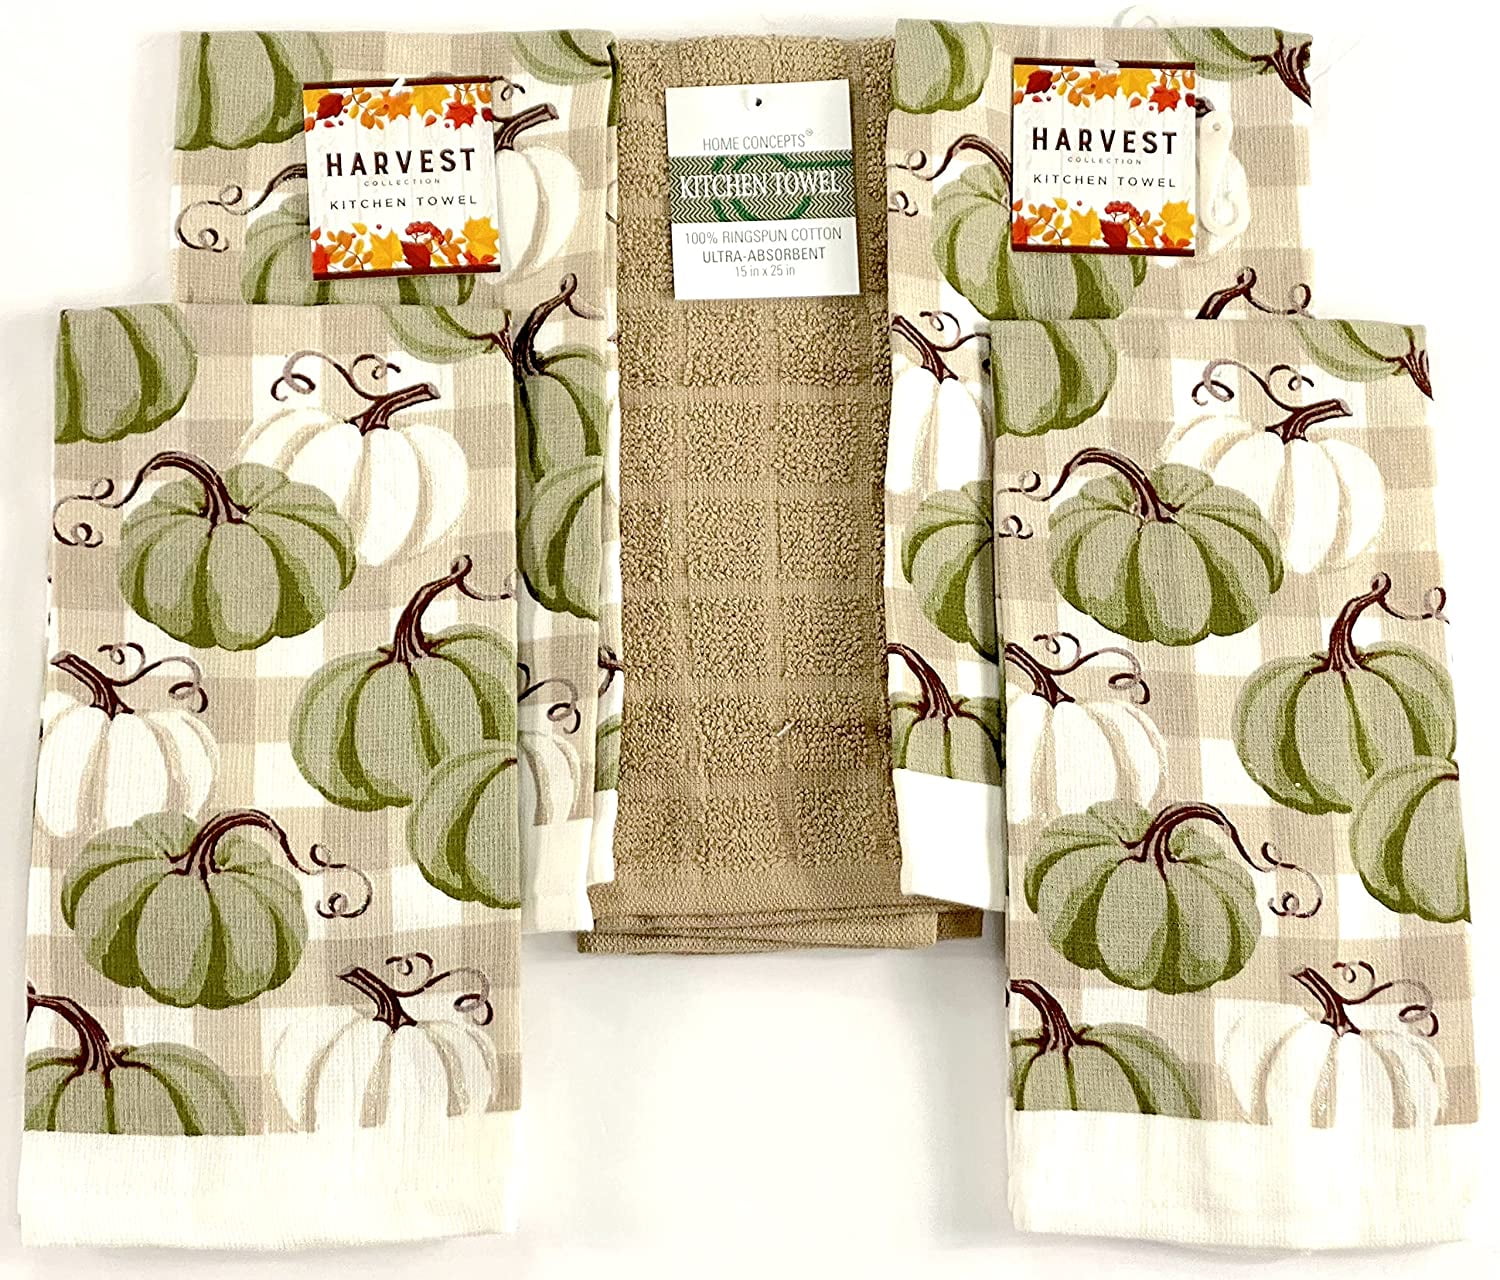 Fall Harvest Thanksgiving Kitchen Towels and Oven Mitts Bundle of 4 Items Teal and White Pumpkins - Green Leaves 2 Dish Towels and 2 Oven Mitts